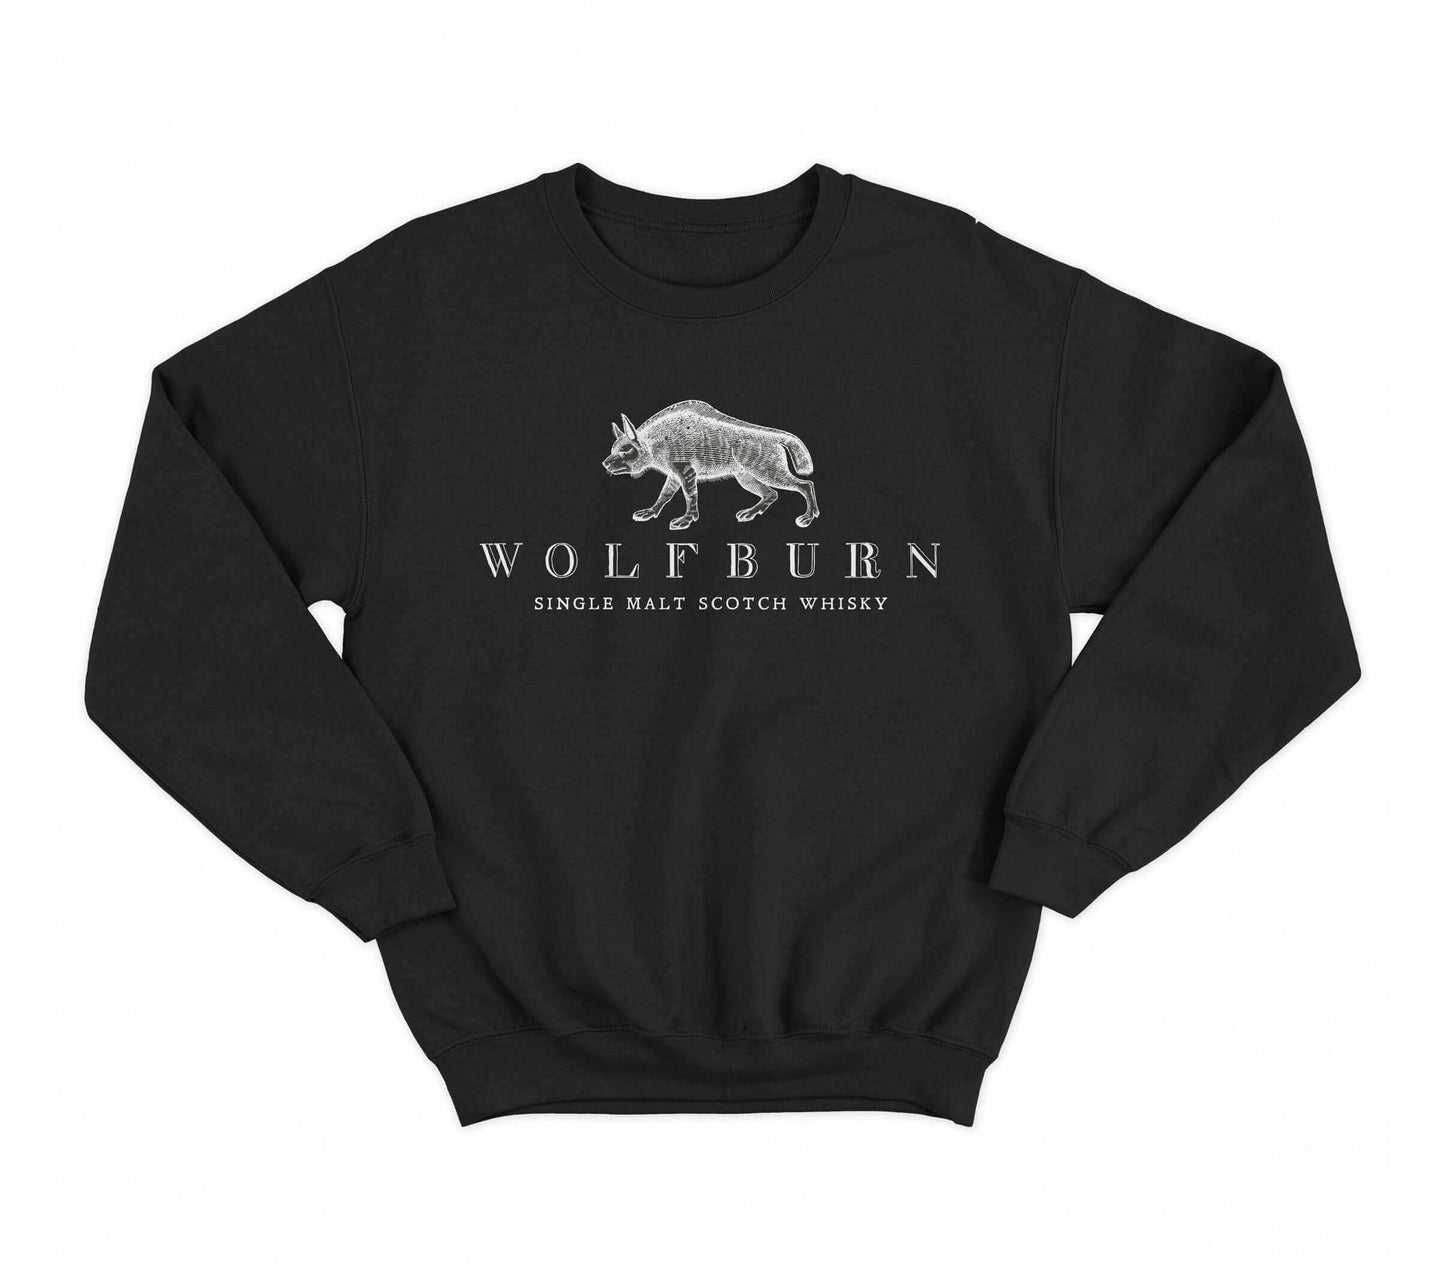 Wolfburn Distillery Wolfburn Sweatshirt ‘Made in Thurso’ Sweatshirt. Screen printed 'Wolfburn' logo on the chest and large Made in Thurso on the back. £35.00